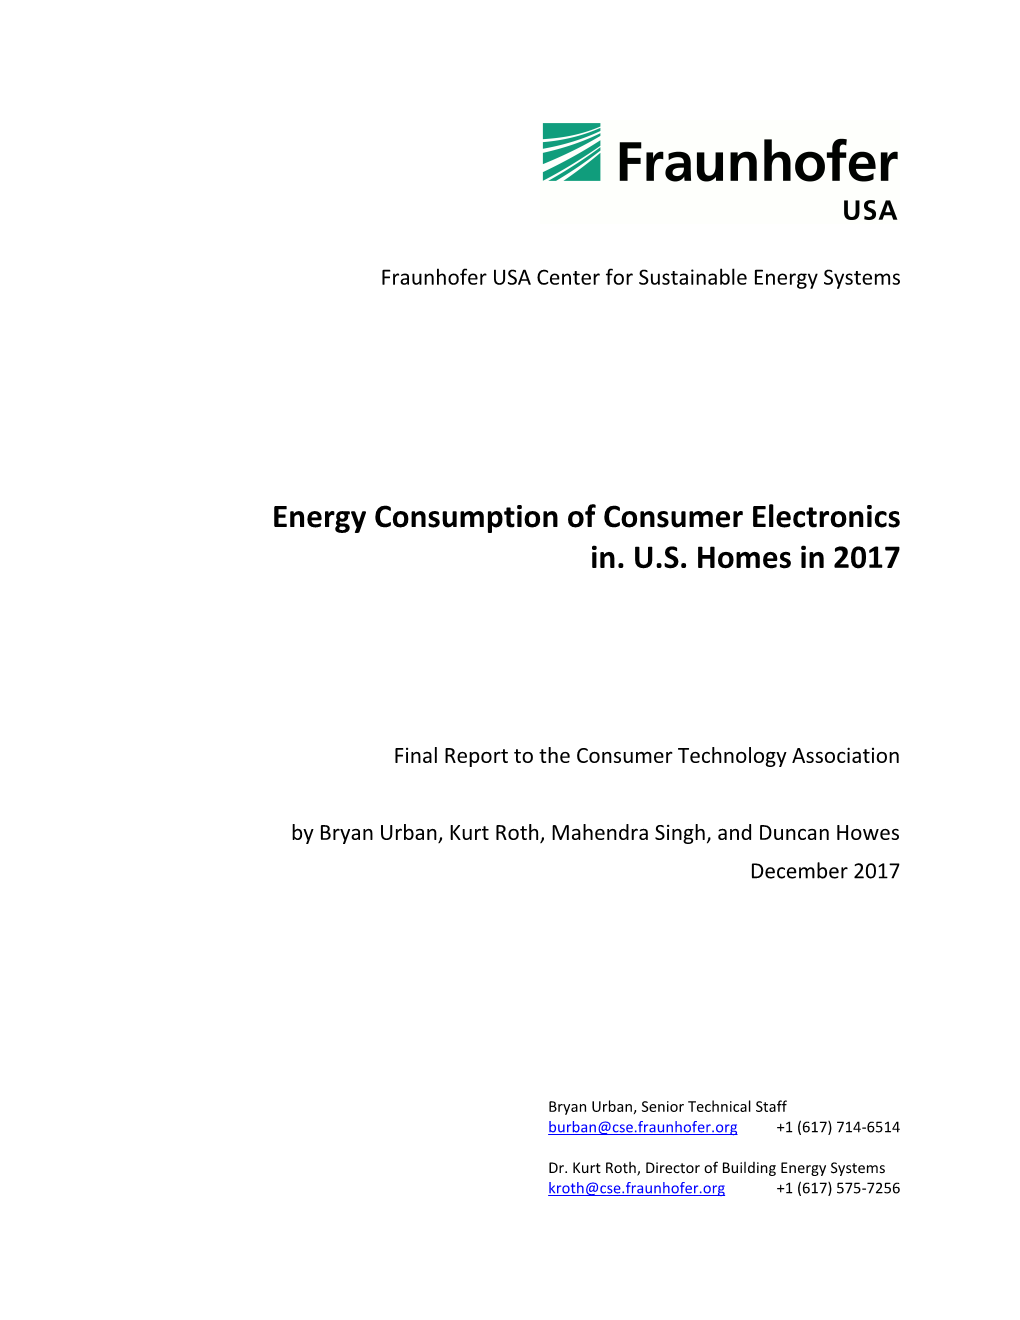 Energy Consumption of Consumer Electronics In. U.S. Homes in 2017